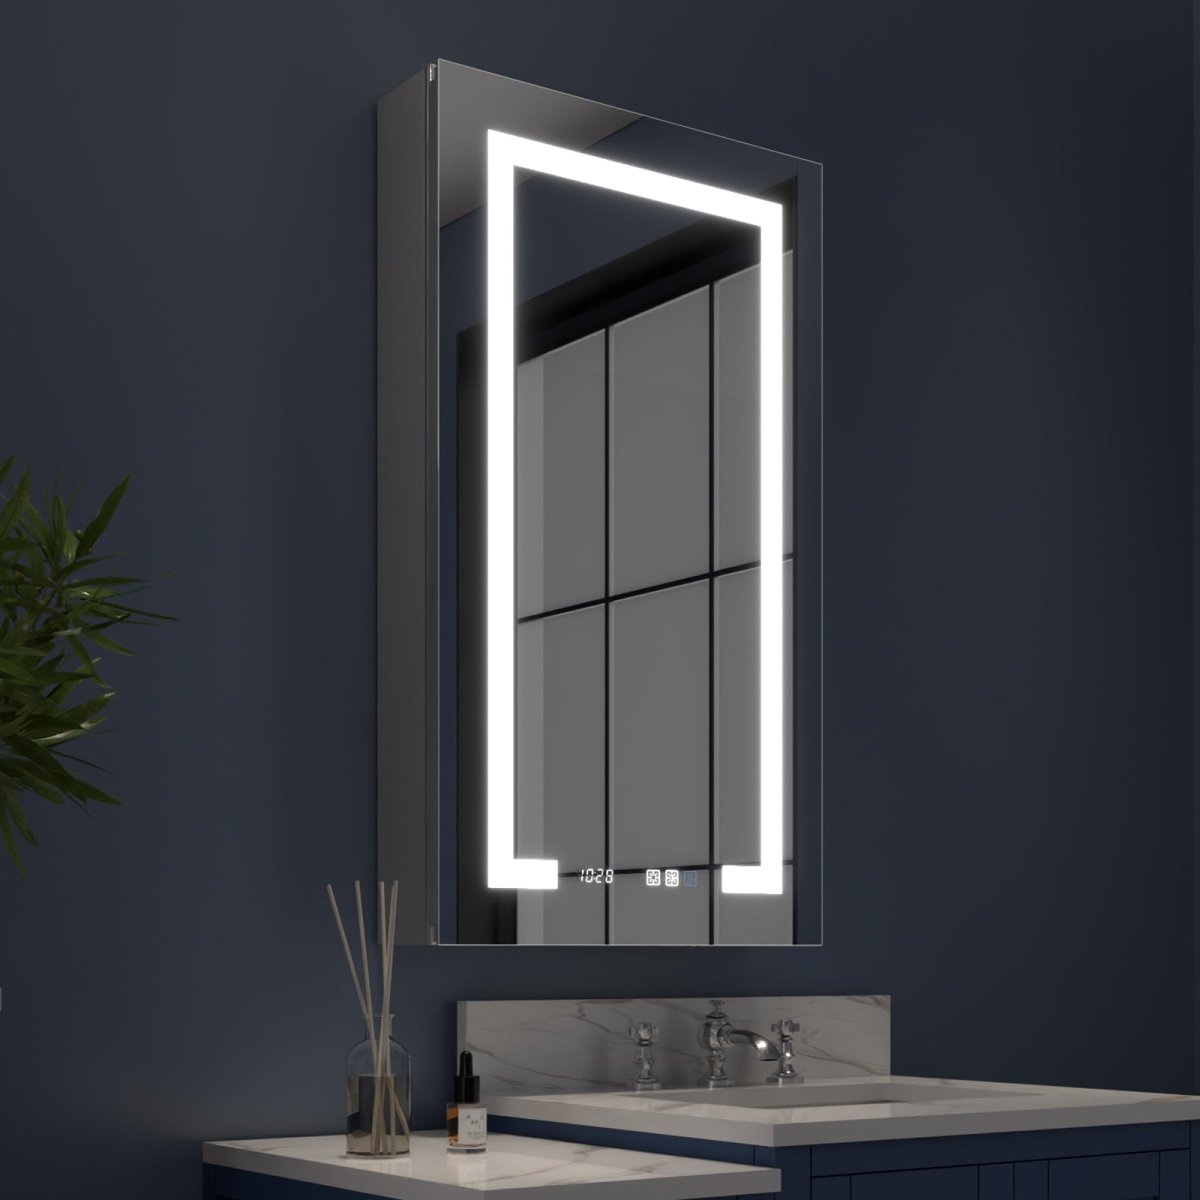 Boost-M2 20" W x 36" H LED Lighted Bathroom Medicine Cabinet with Mirror and Clock, Right Hinge